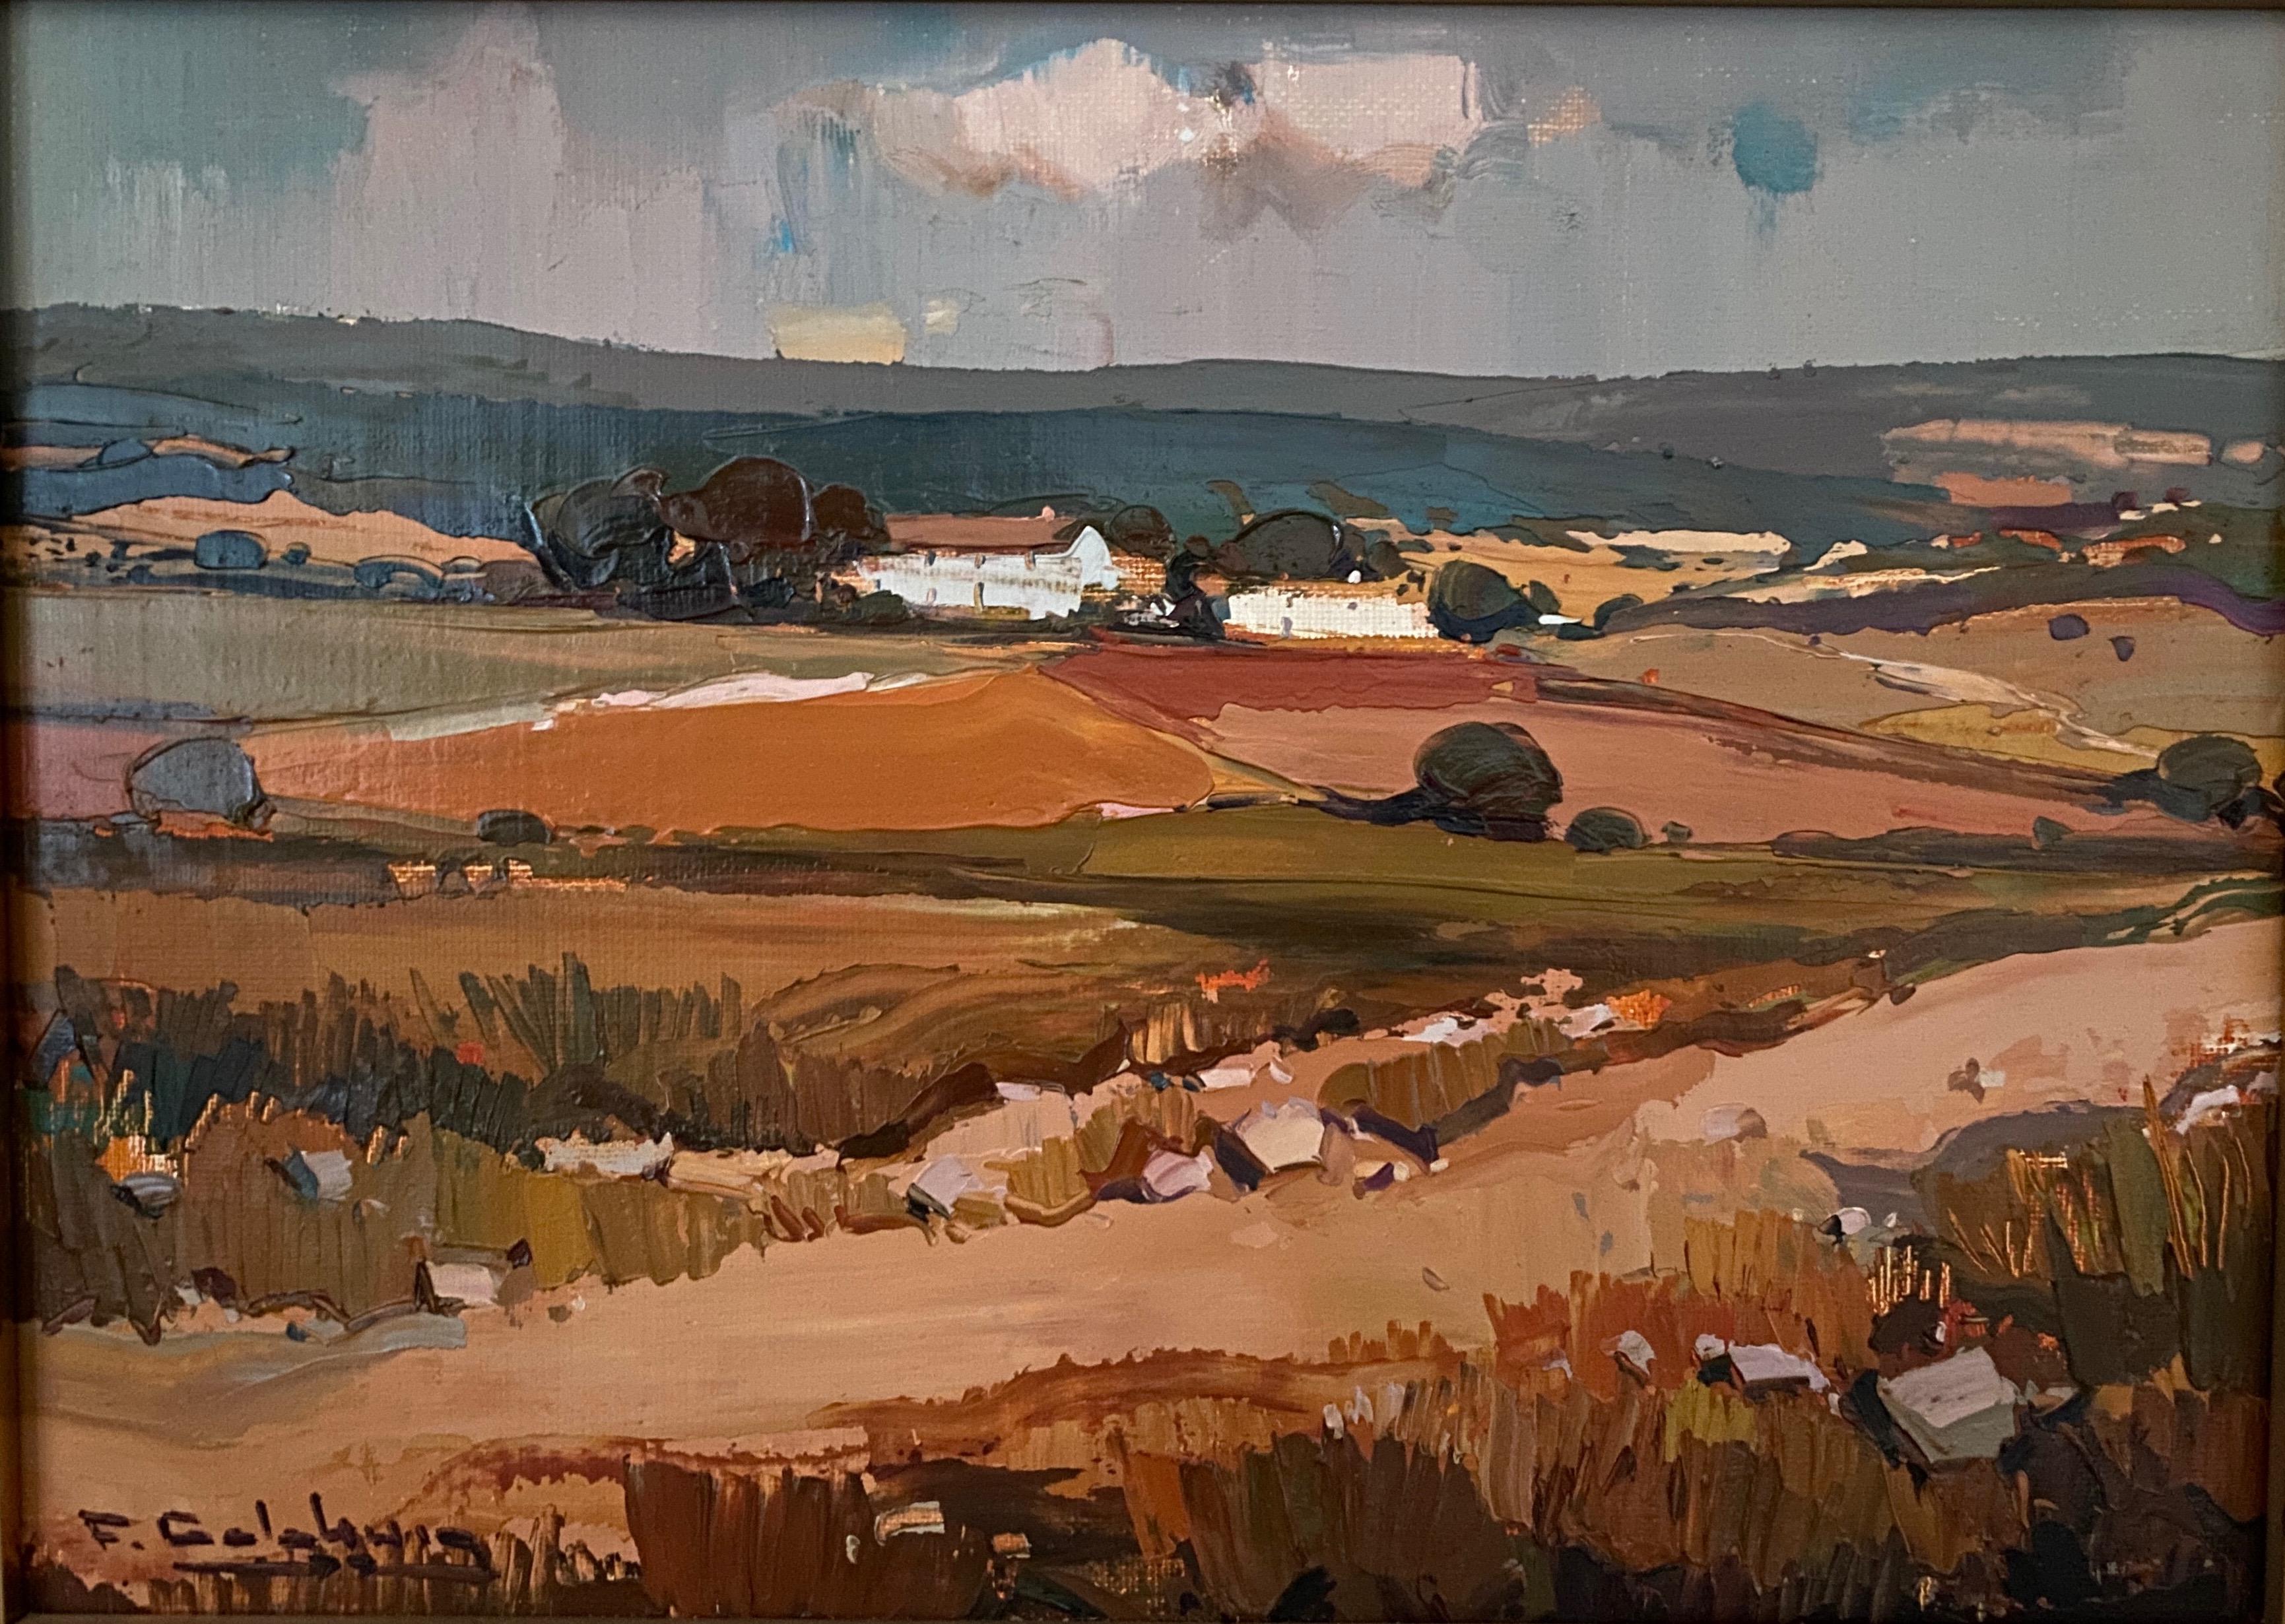 Brown ocher and grey countryside landscape. Oil postimpressionist style